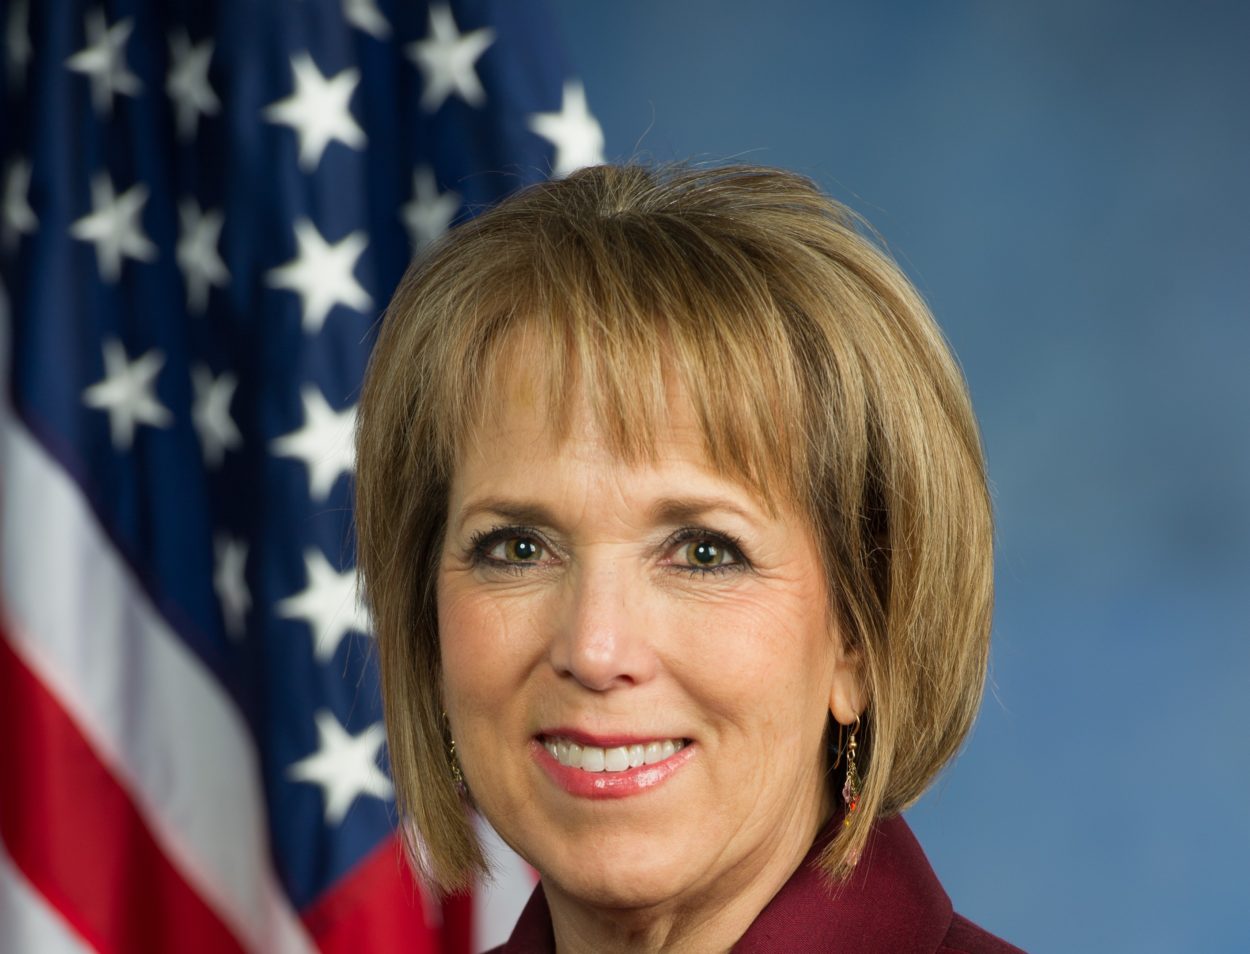 Lujan Grisham took part in trip secretly paid for by Azerbaijan state oil company